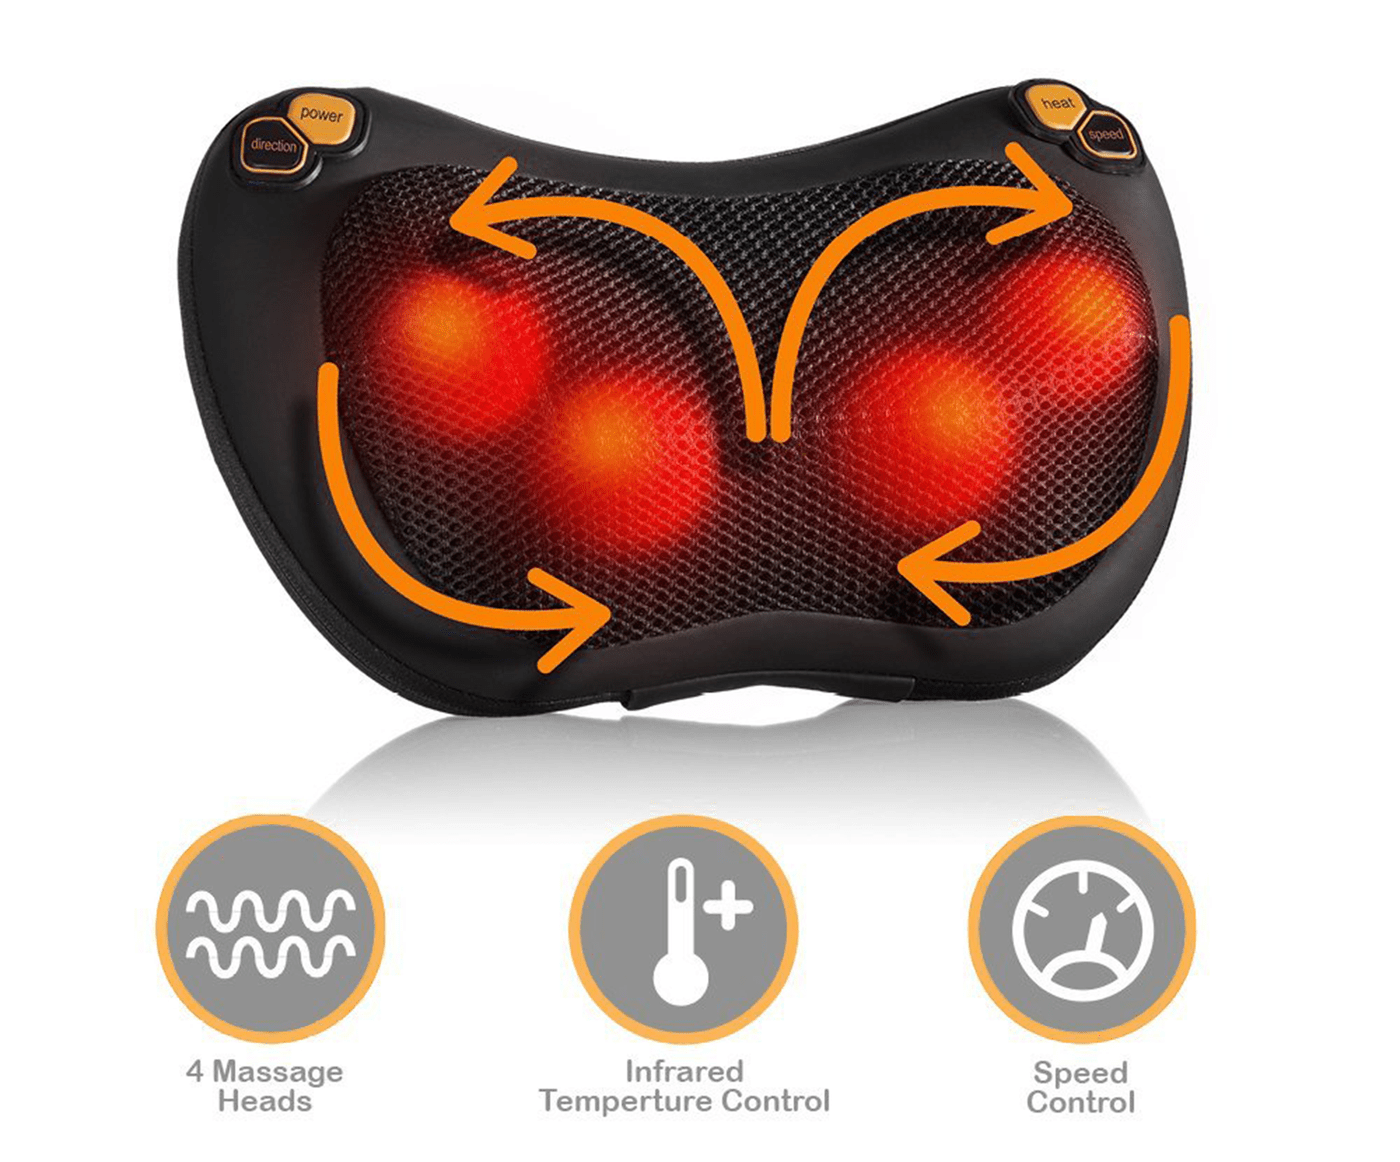 Electronic Neck Cushion Full Body Massager with Heat for pain relief Massage Machine for Neck Back Shoulder Pillow Massager - Swiss Relaxation therapy (Brown) askddeal.com